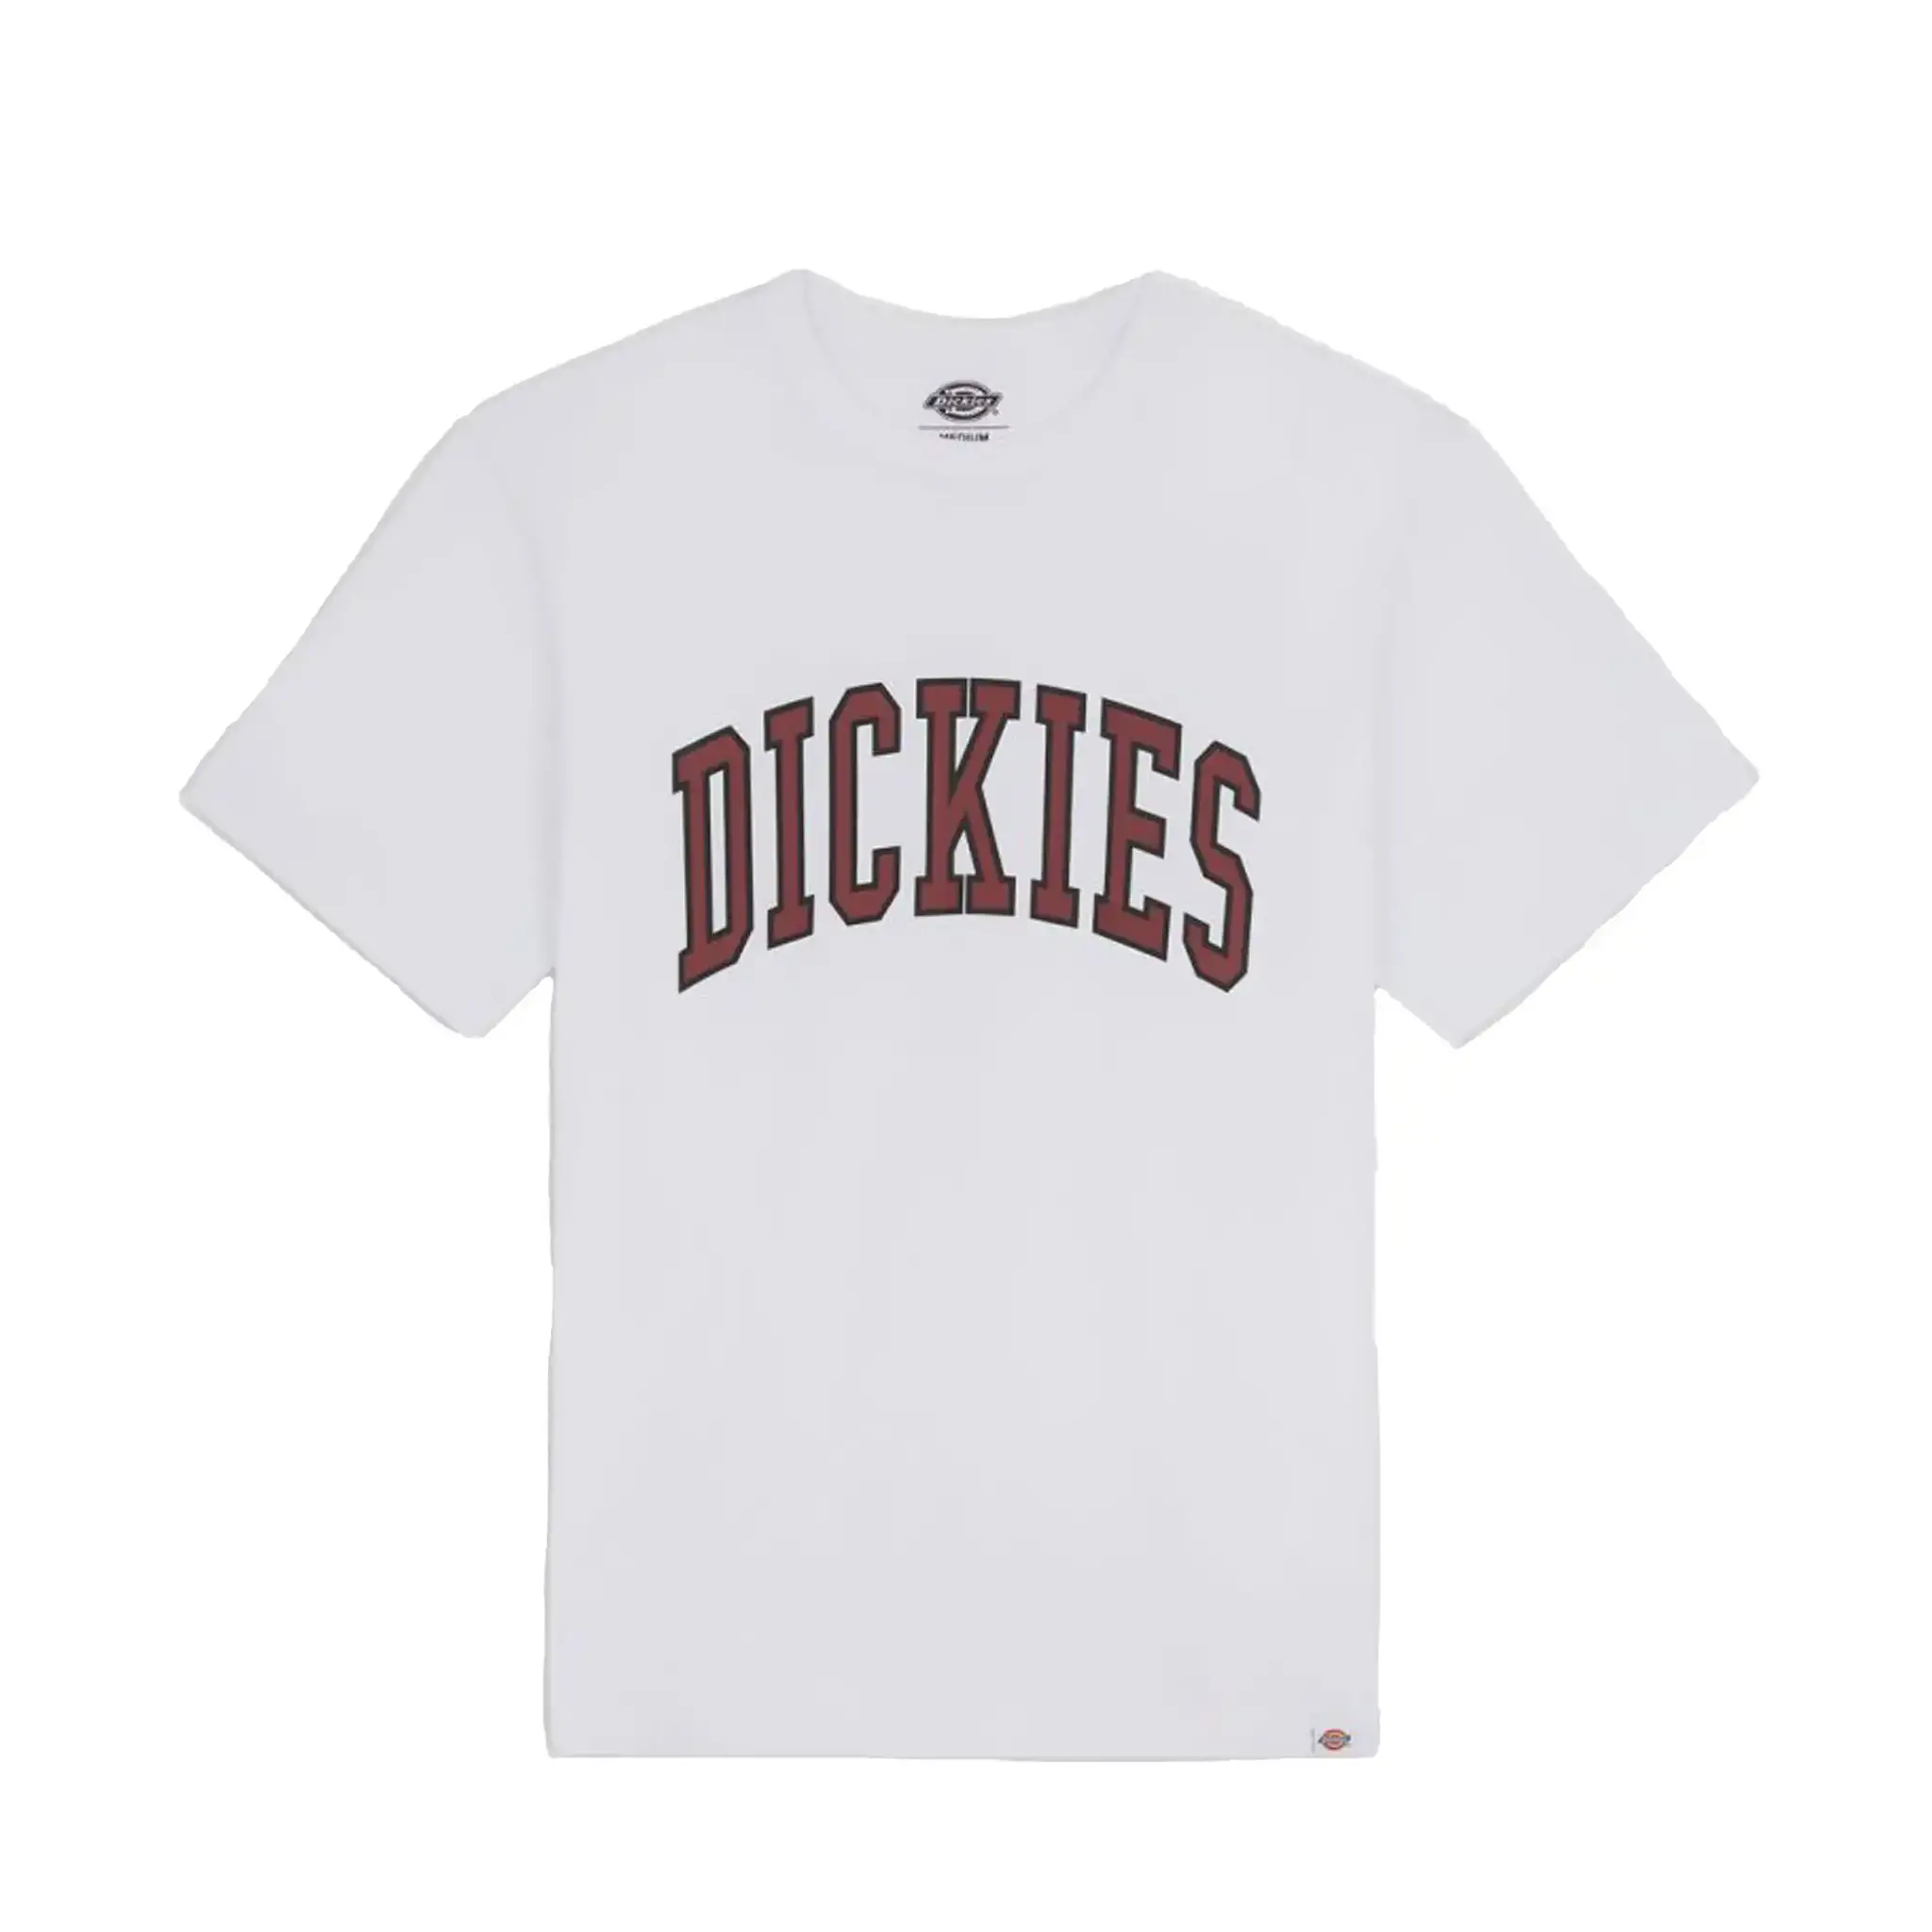 Dickies / t-shirt Aitkin in wit